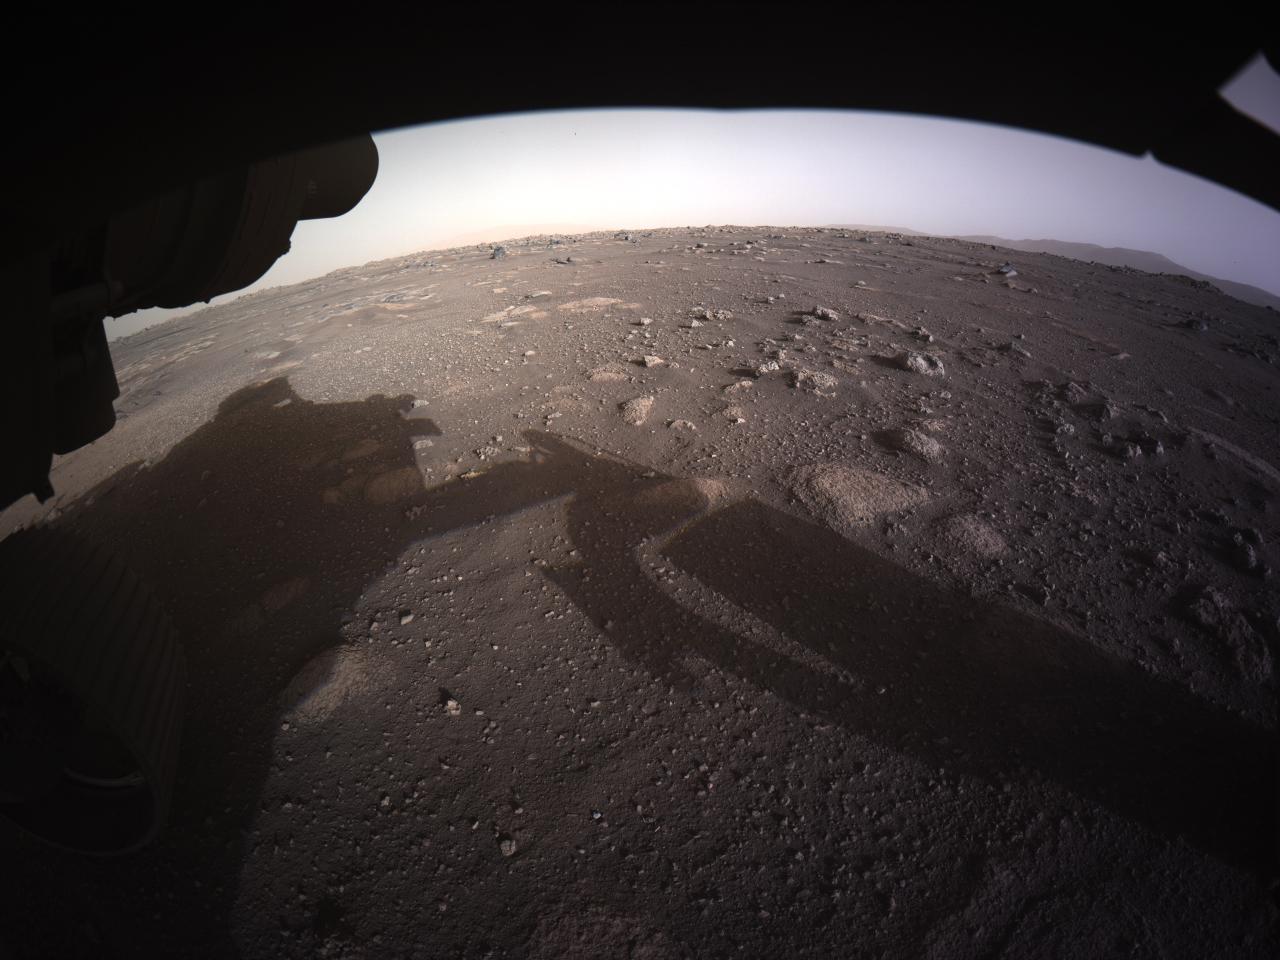 Mars' surface, in high-resolution and color, as captured by the Hazcams on NASA's Perseverance rover.